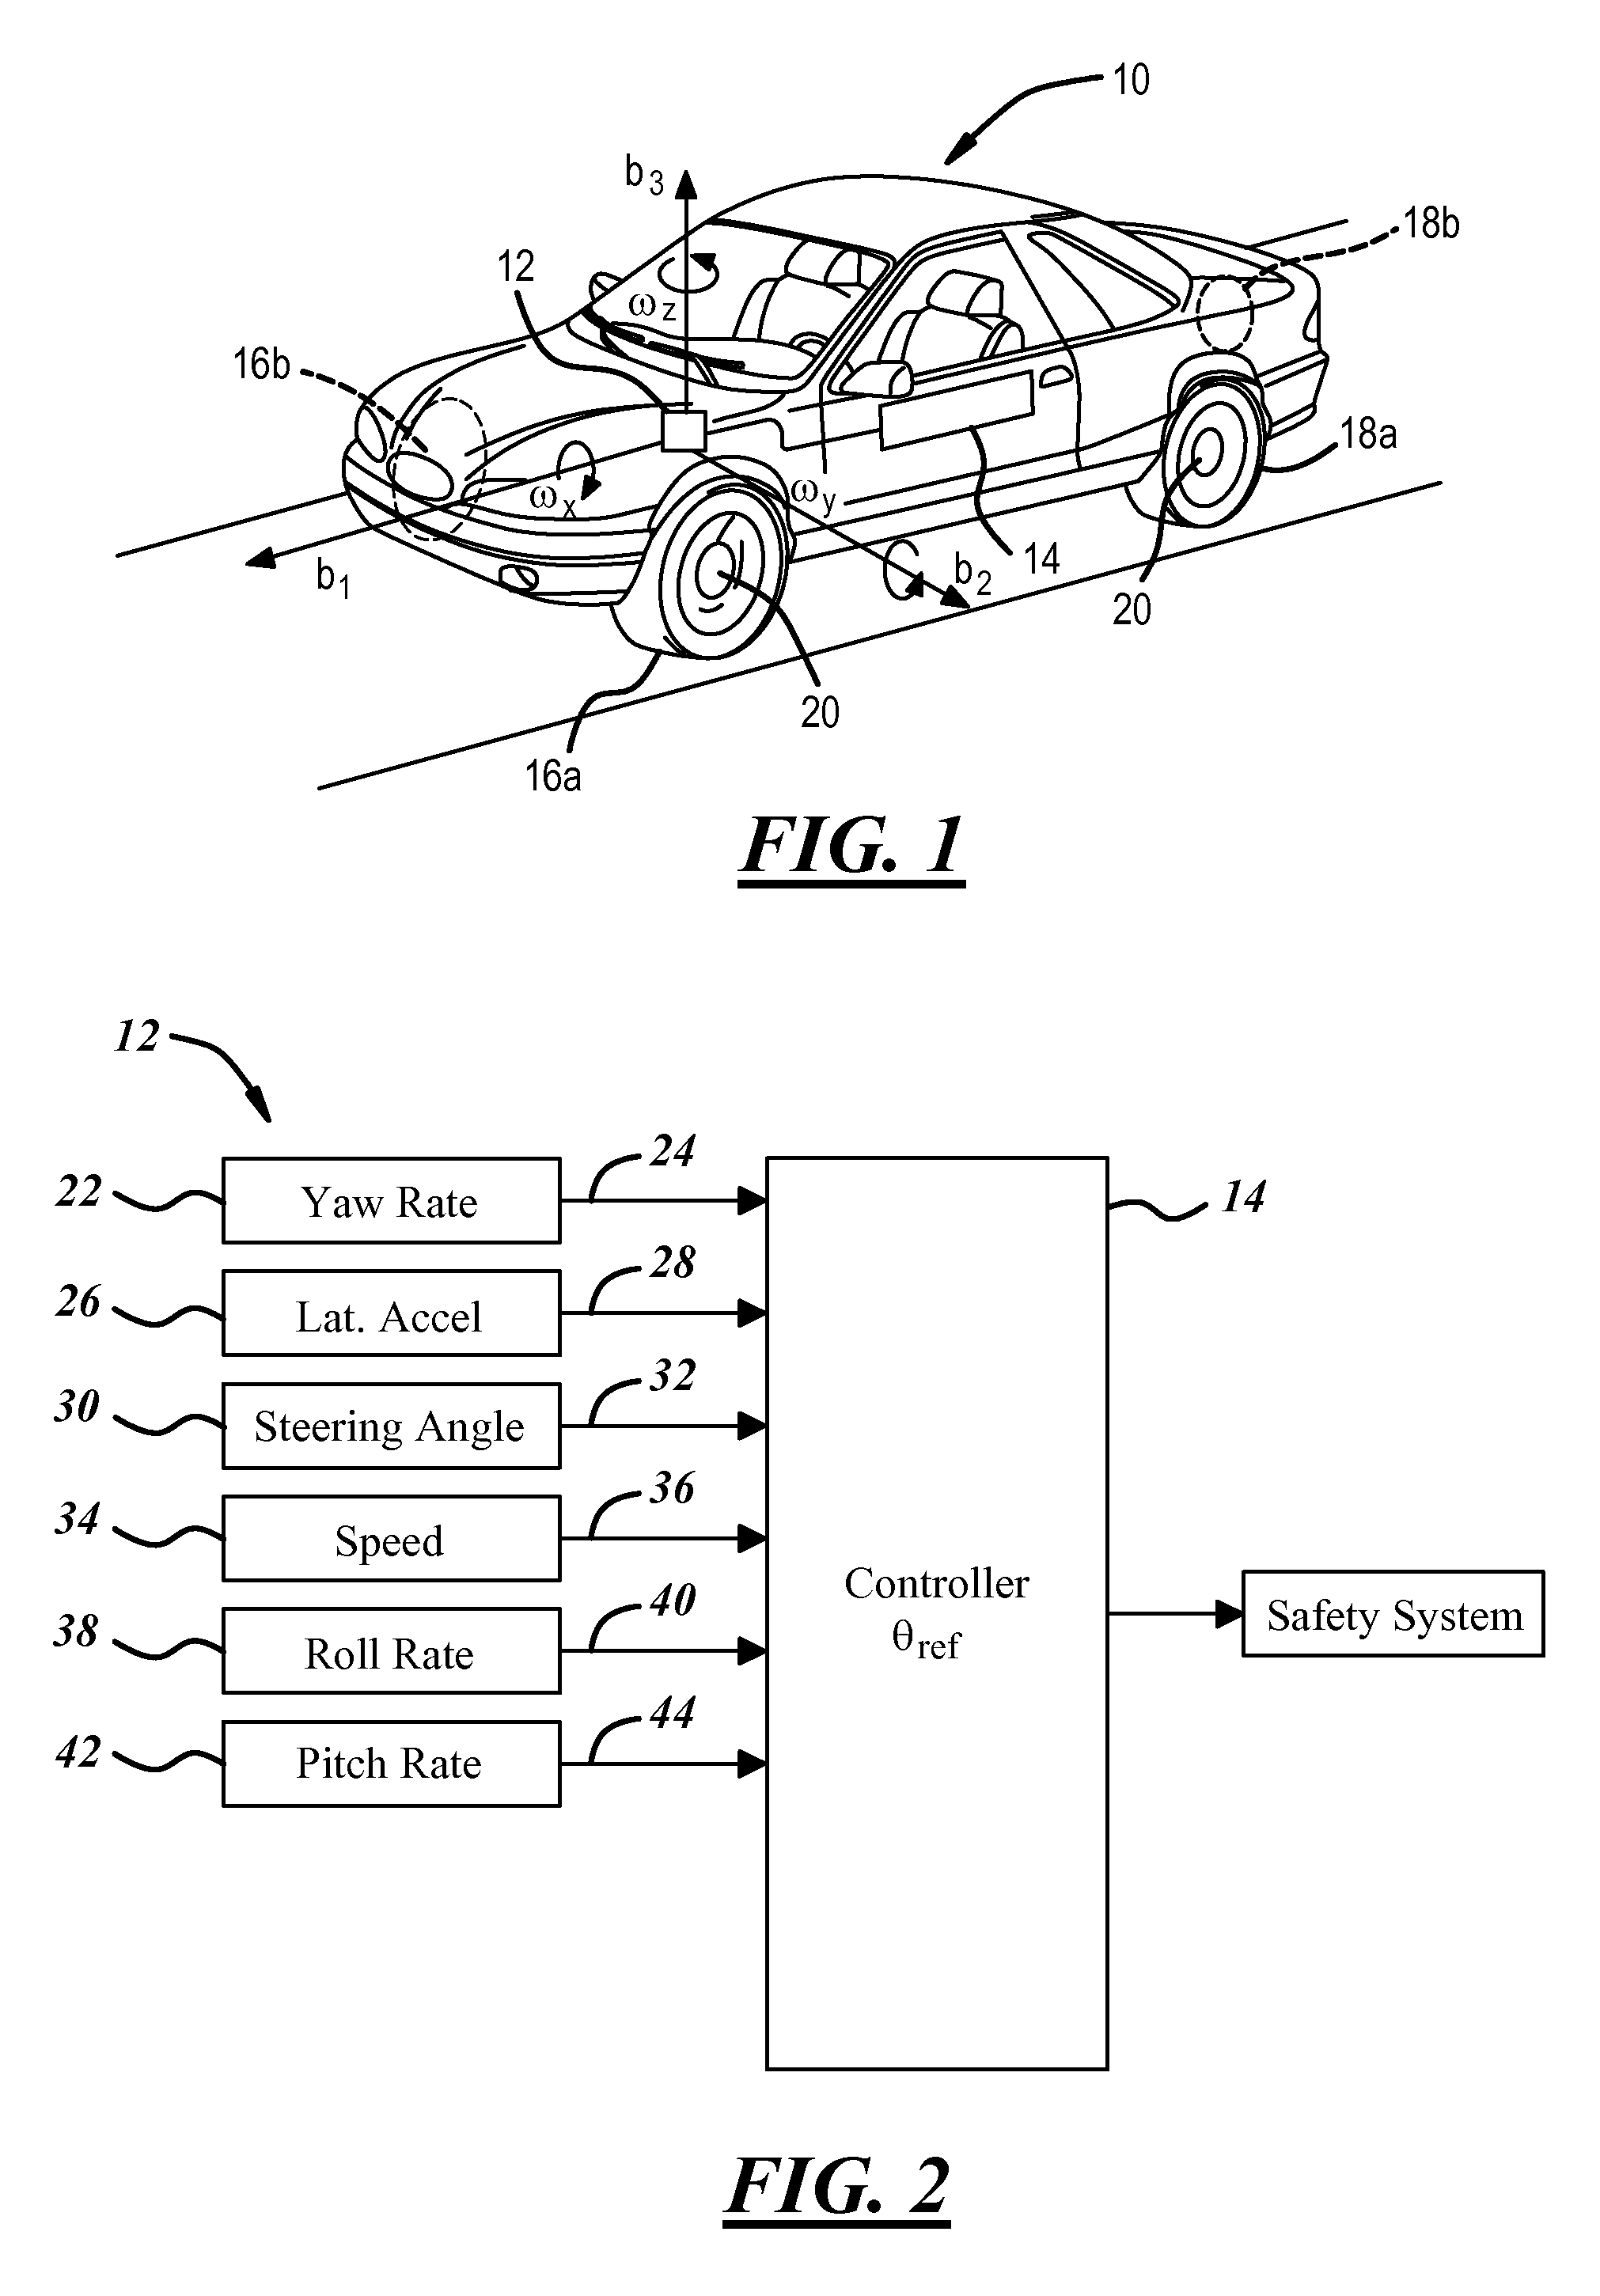 System and Method for Detecting a Pitch Rate Sensor Fault